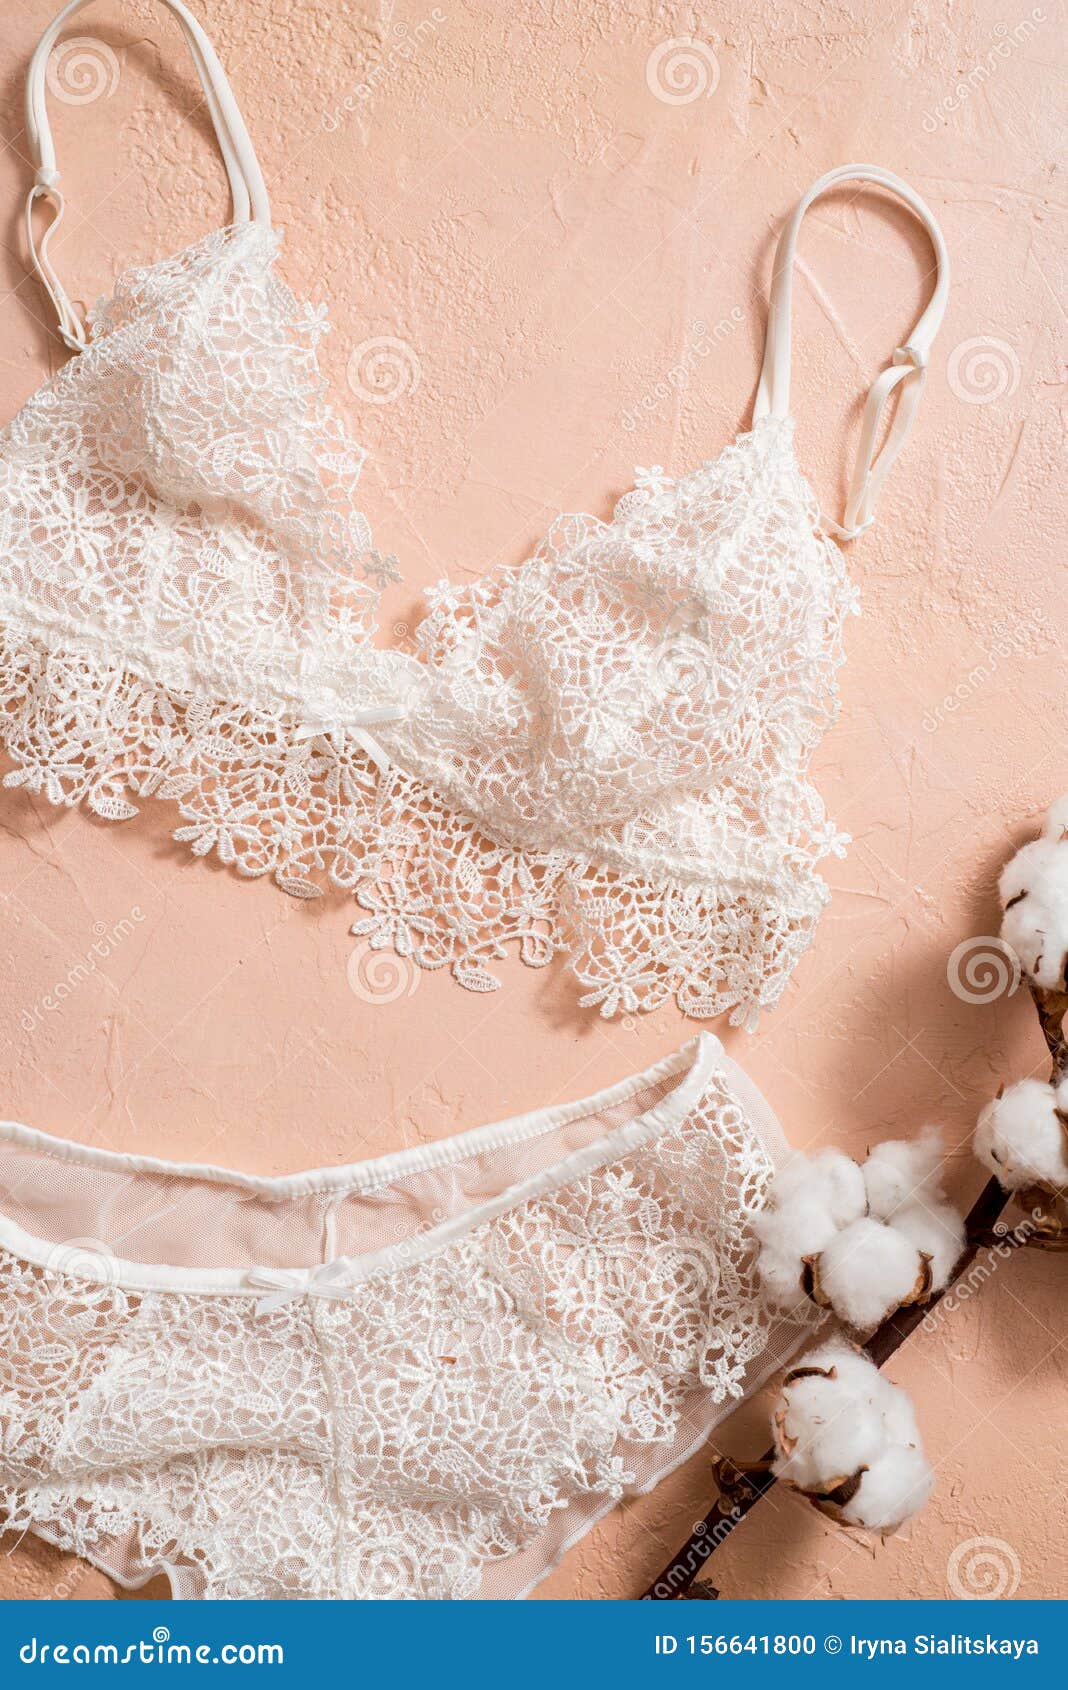 Cotton Striped Panties and White Bra. Women S Lingerie on the Concrete  Background. Top View Shot of Fashionable Women S Underwea Stock Photo -  Image of lace, elegance: 156641800